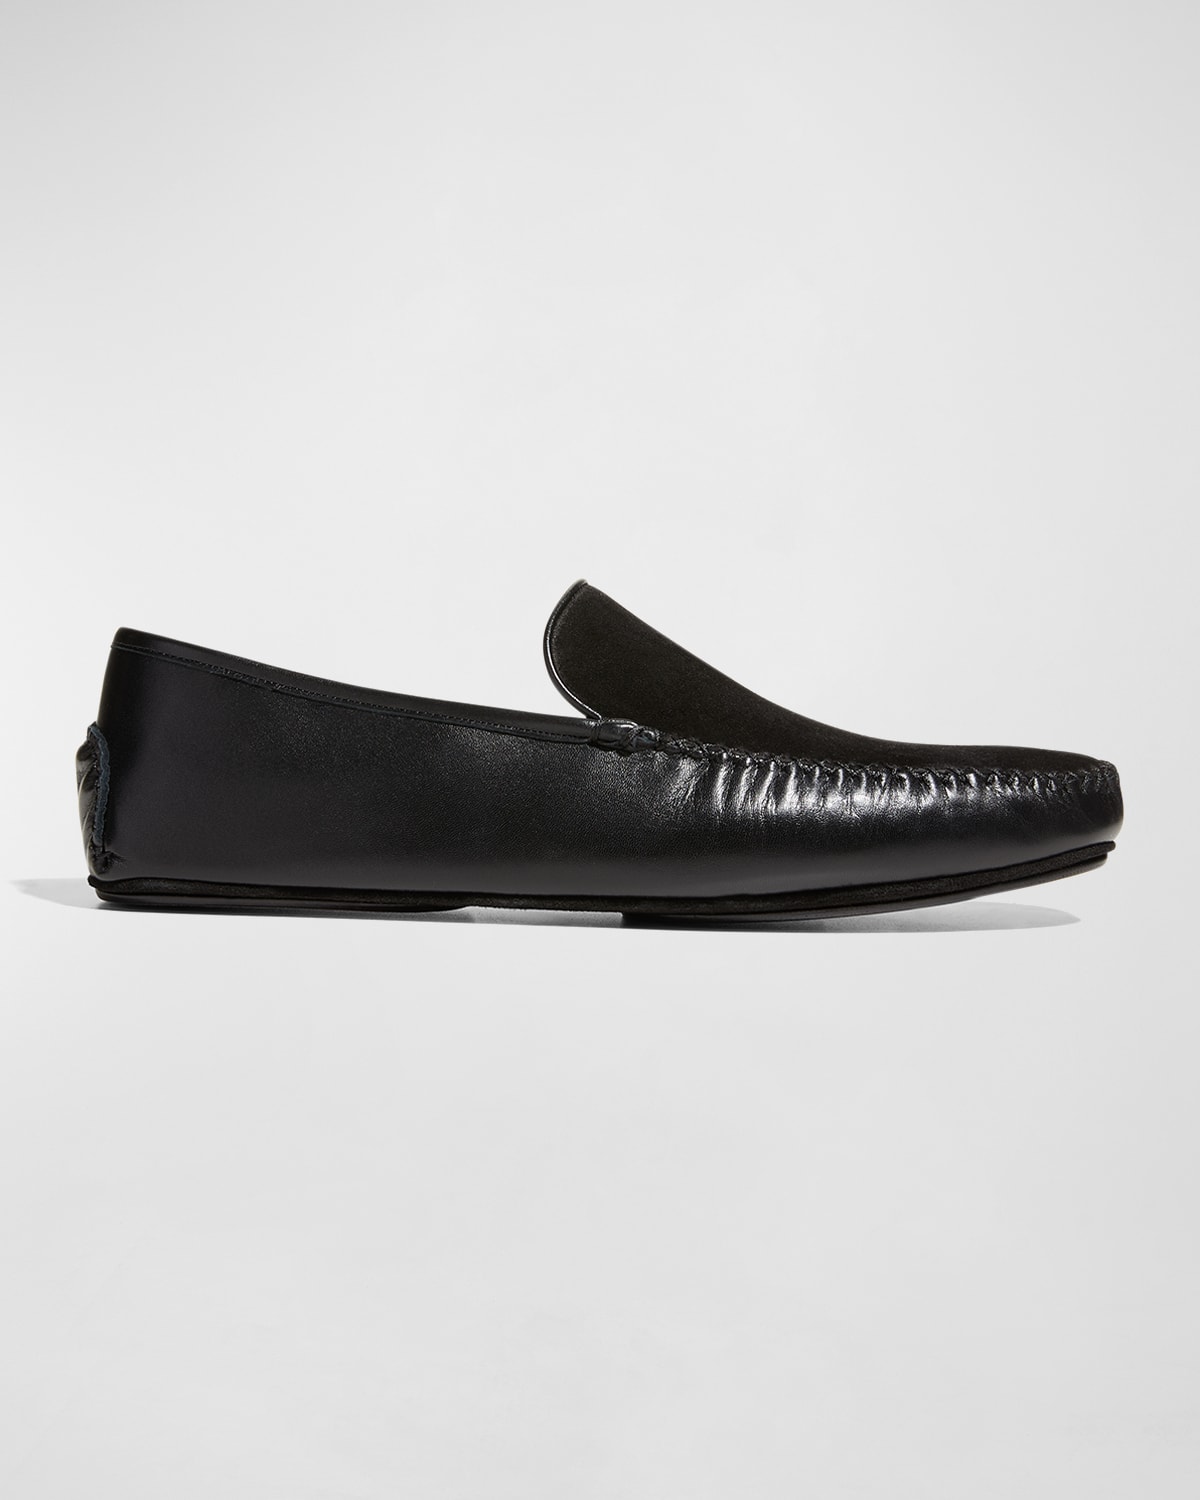 Men's Mayfair Suede-Leather Loafers